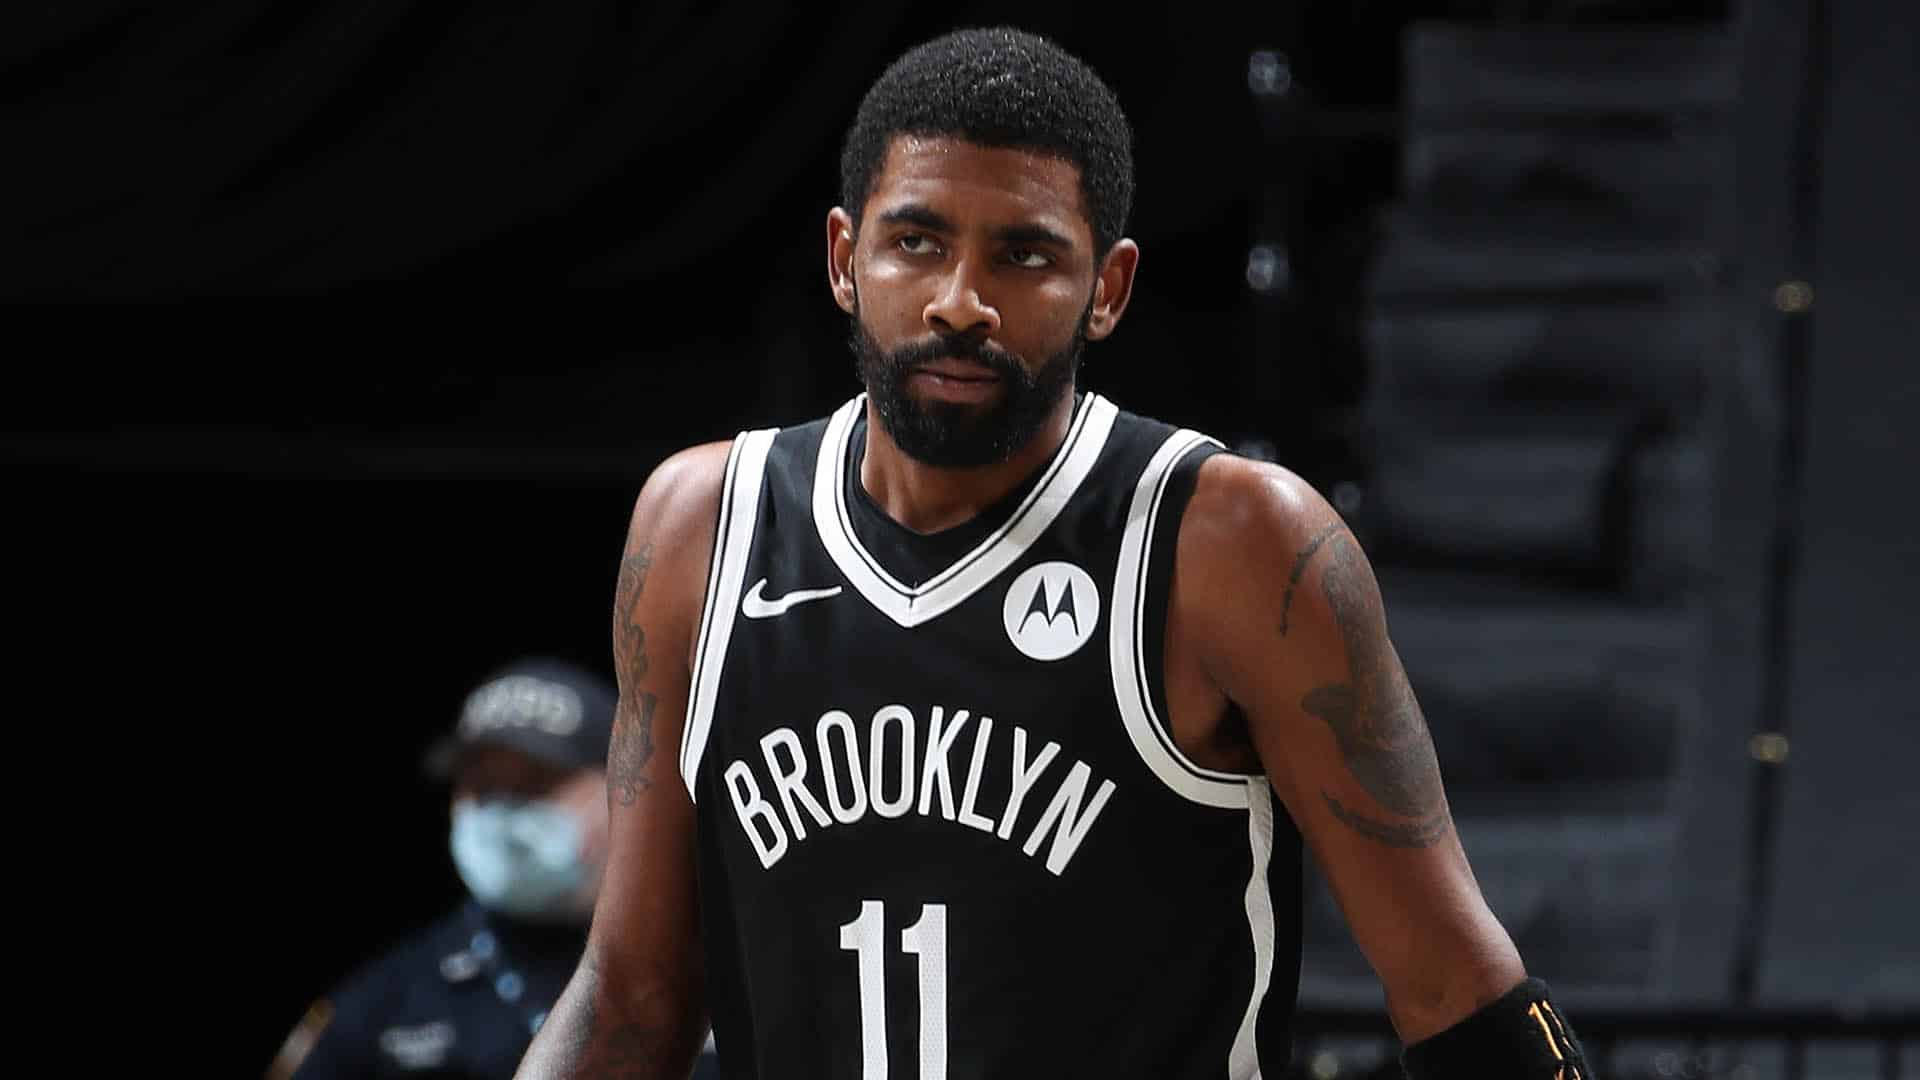 Kyrie Irving questionable to return against The Bucks after missing 6 games!